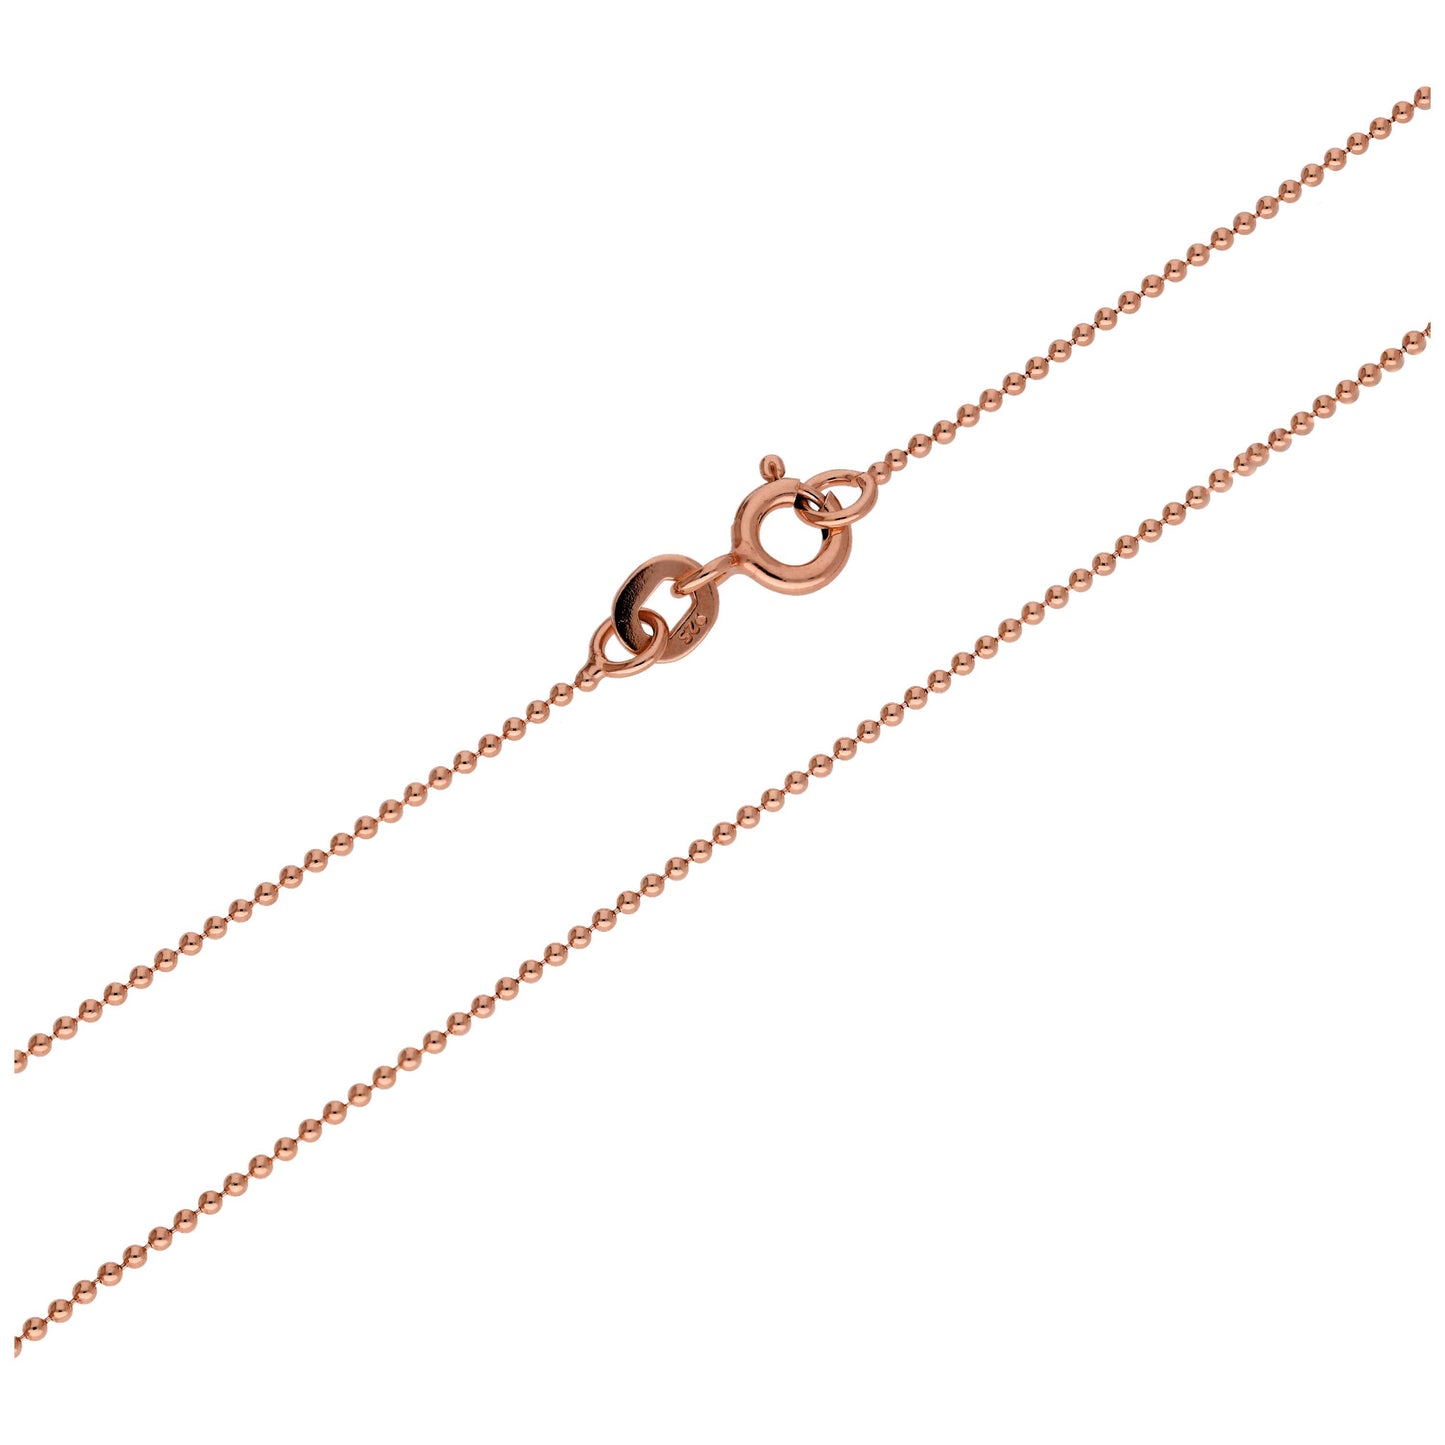 Rose Gold Plated Sterling Silver 1mm Bead Chain 16 Inches